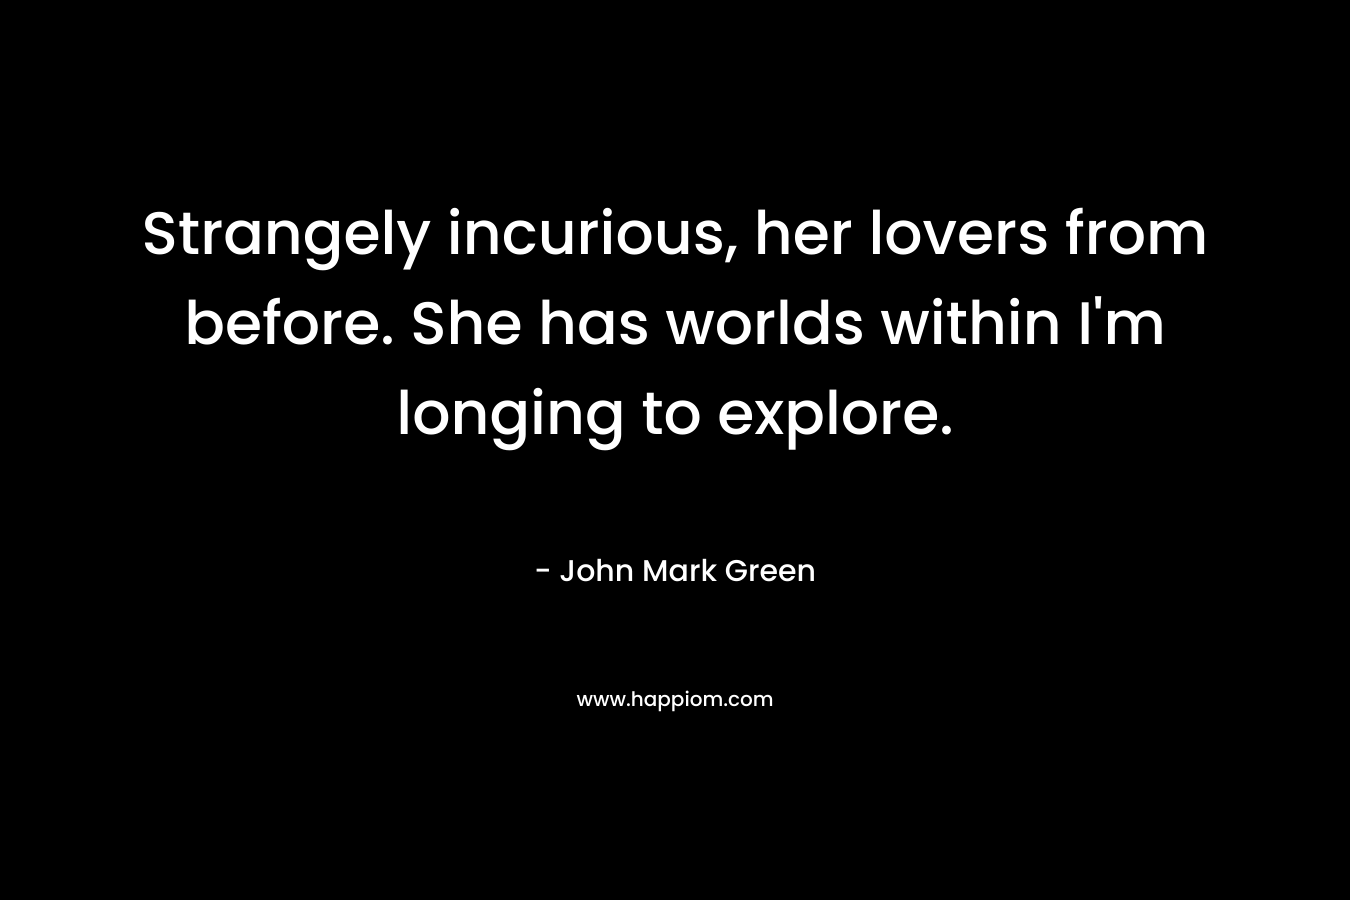 Strangely incurious, her lovers from before. She has worlds within I'm longing to explore.